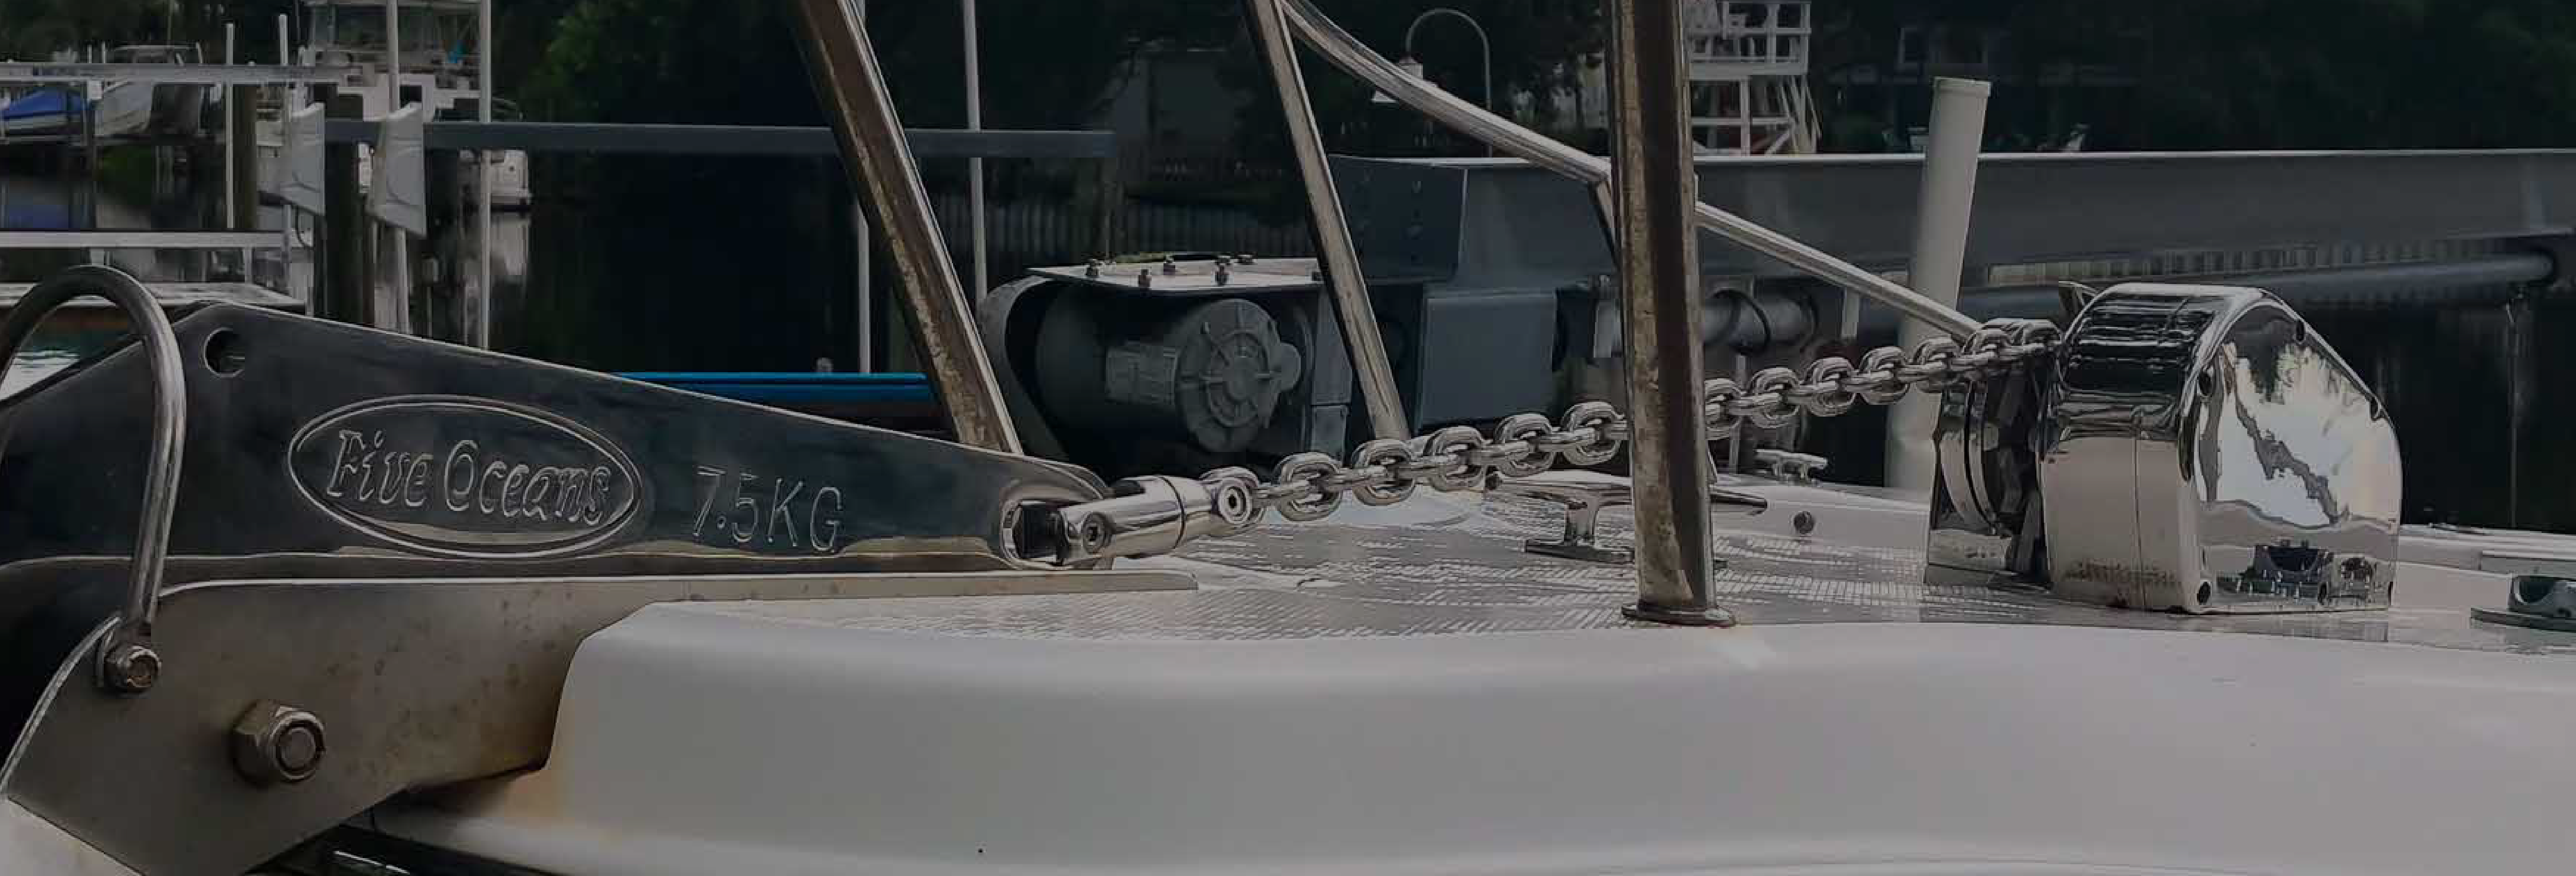 HOW TO CHOOSE THE RIGHT ELECTRIC ANCHOR WINDLASS FOR YOUR BOAT